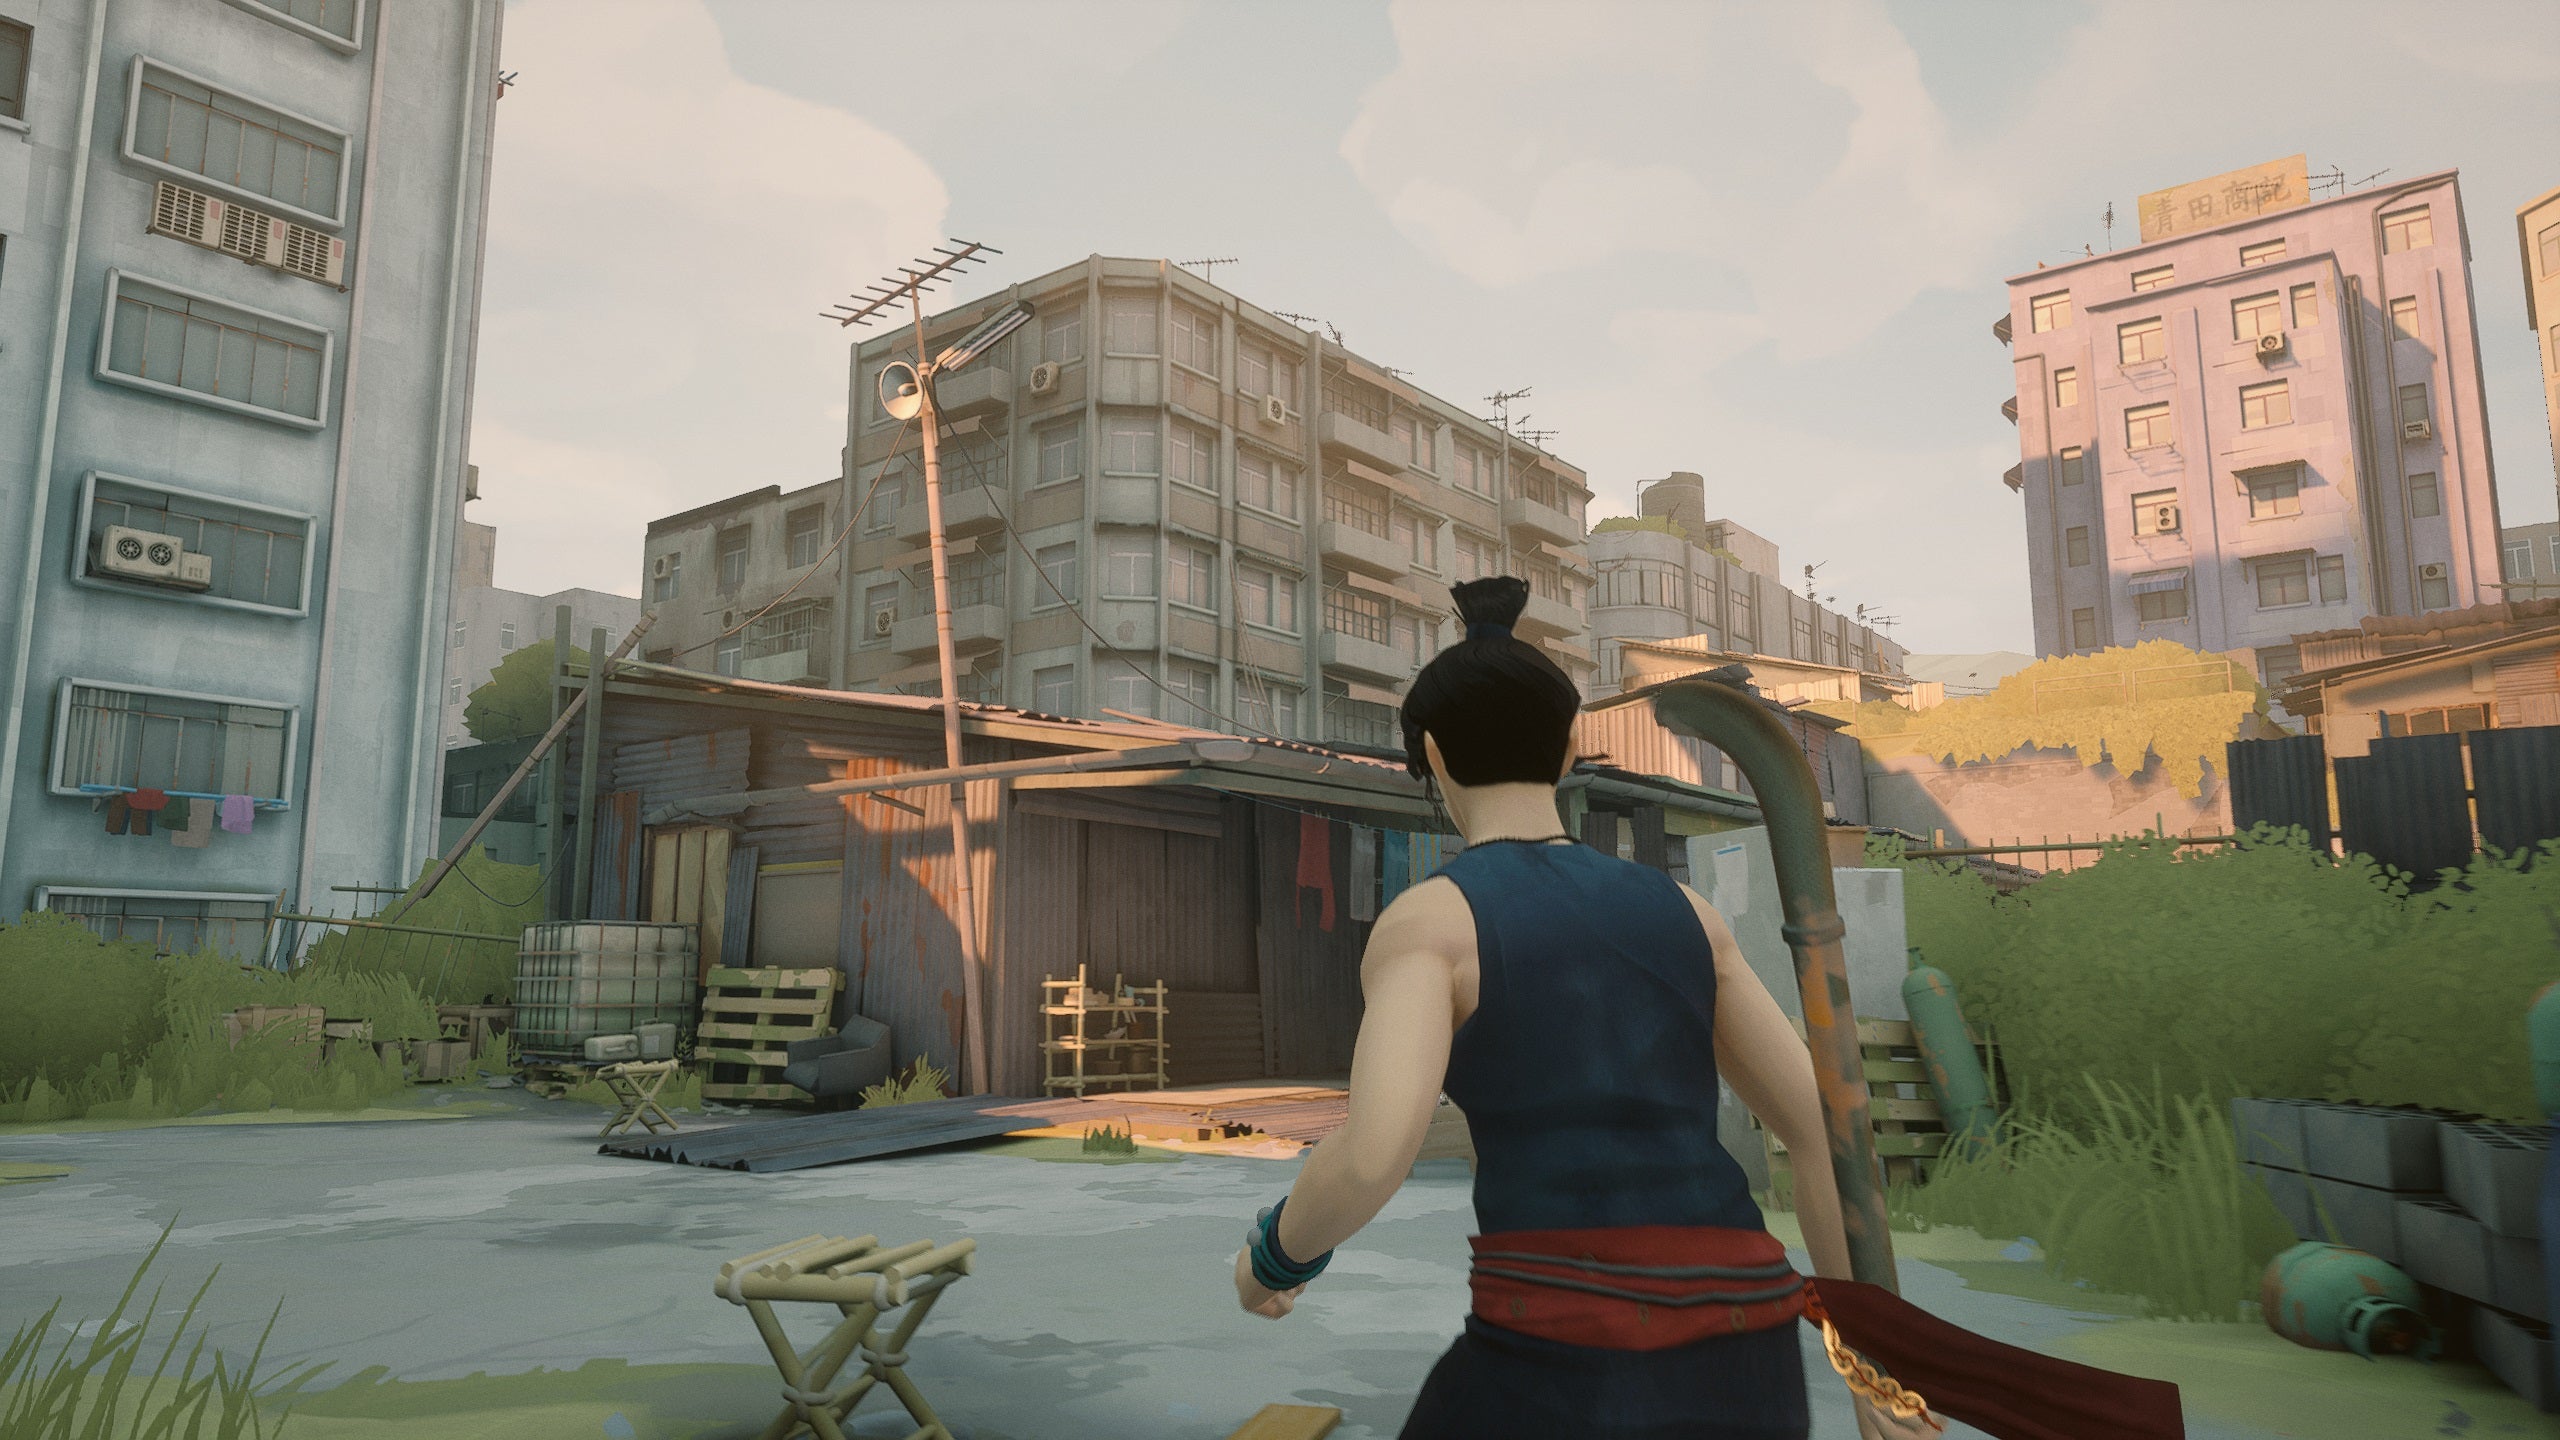 Sifu's protagonist approaches a building.  The lighting indicates that it is golden hour.